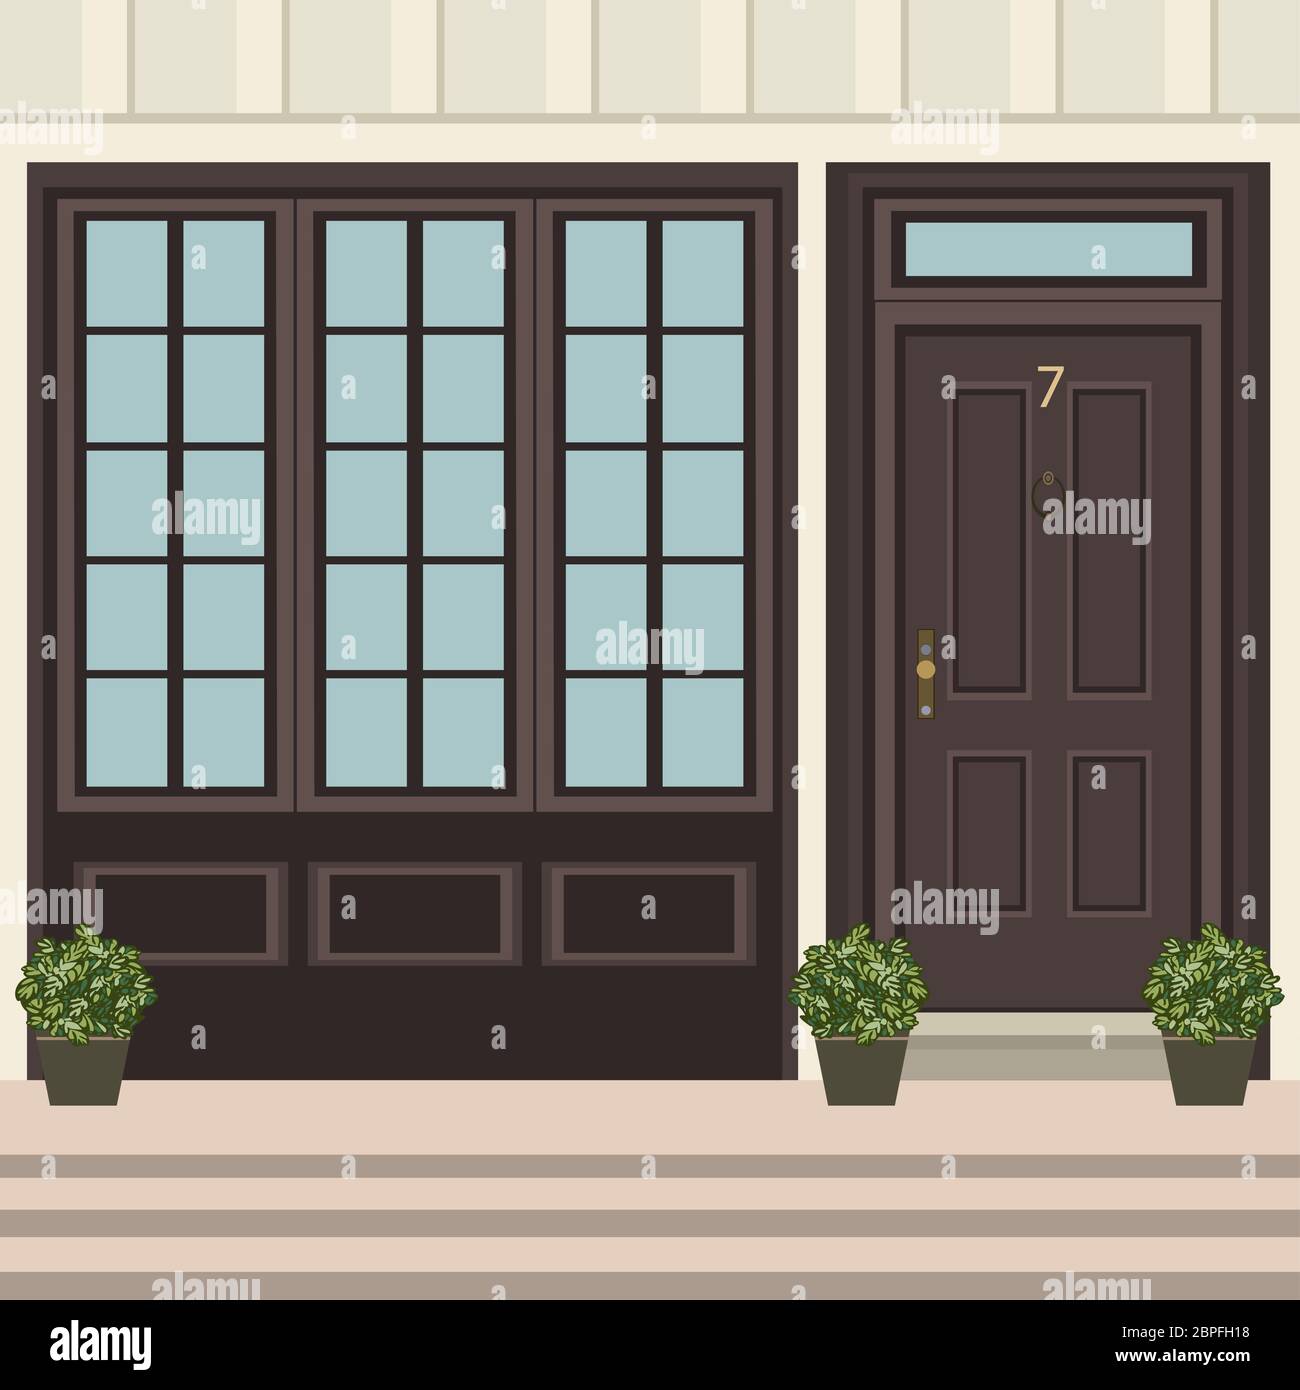 Flat Entrance Designs Exterior All you Need To Know